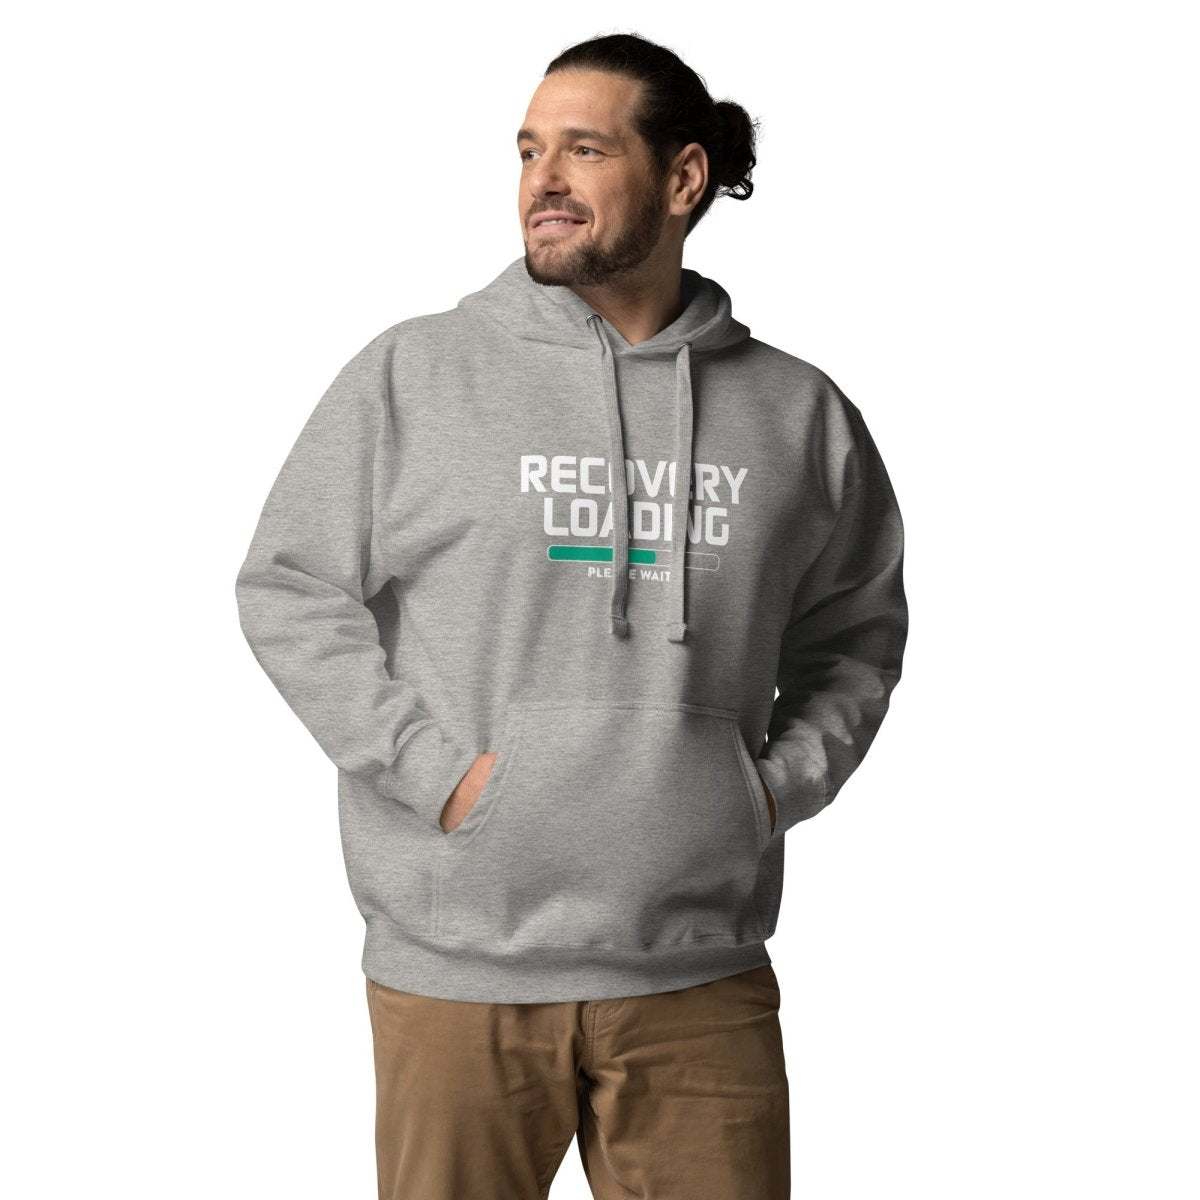 Recovery Loading Men's Inspirational Hoodie - Clean & Sober